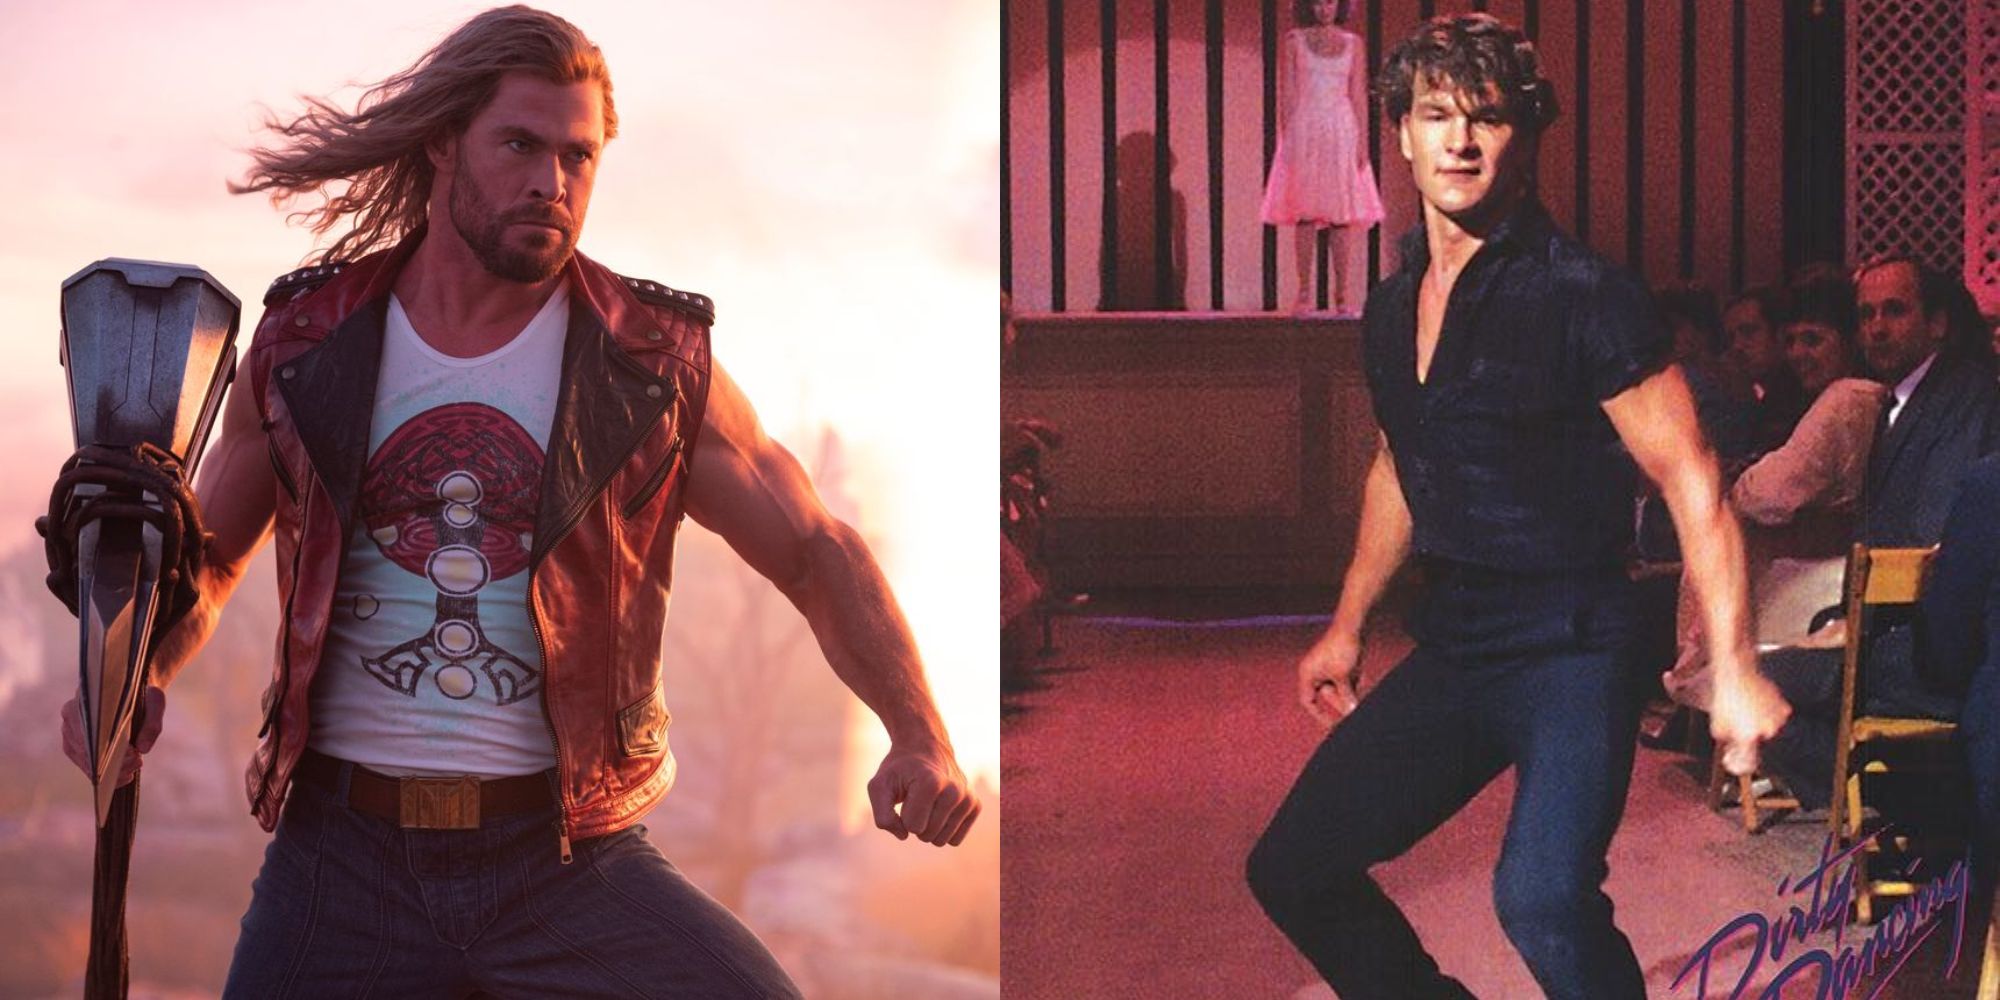 Split image showing Thor in Love and Thunder and Johnny in Dirty Dancing.